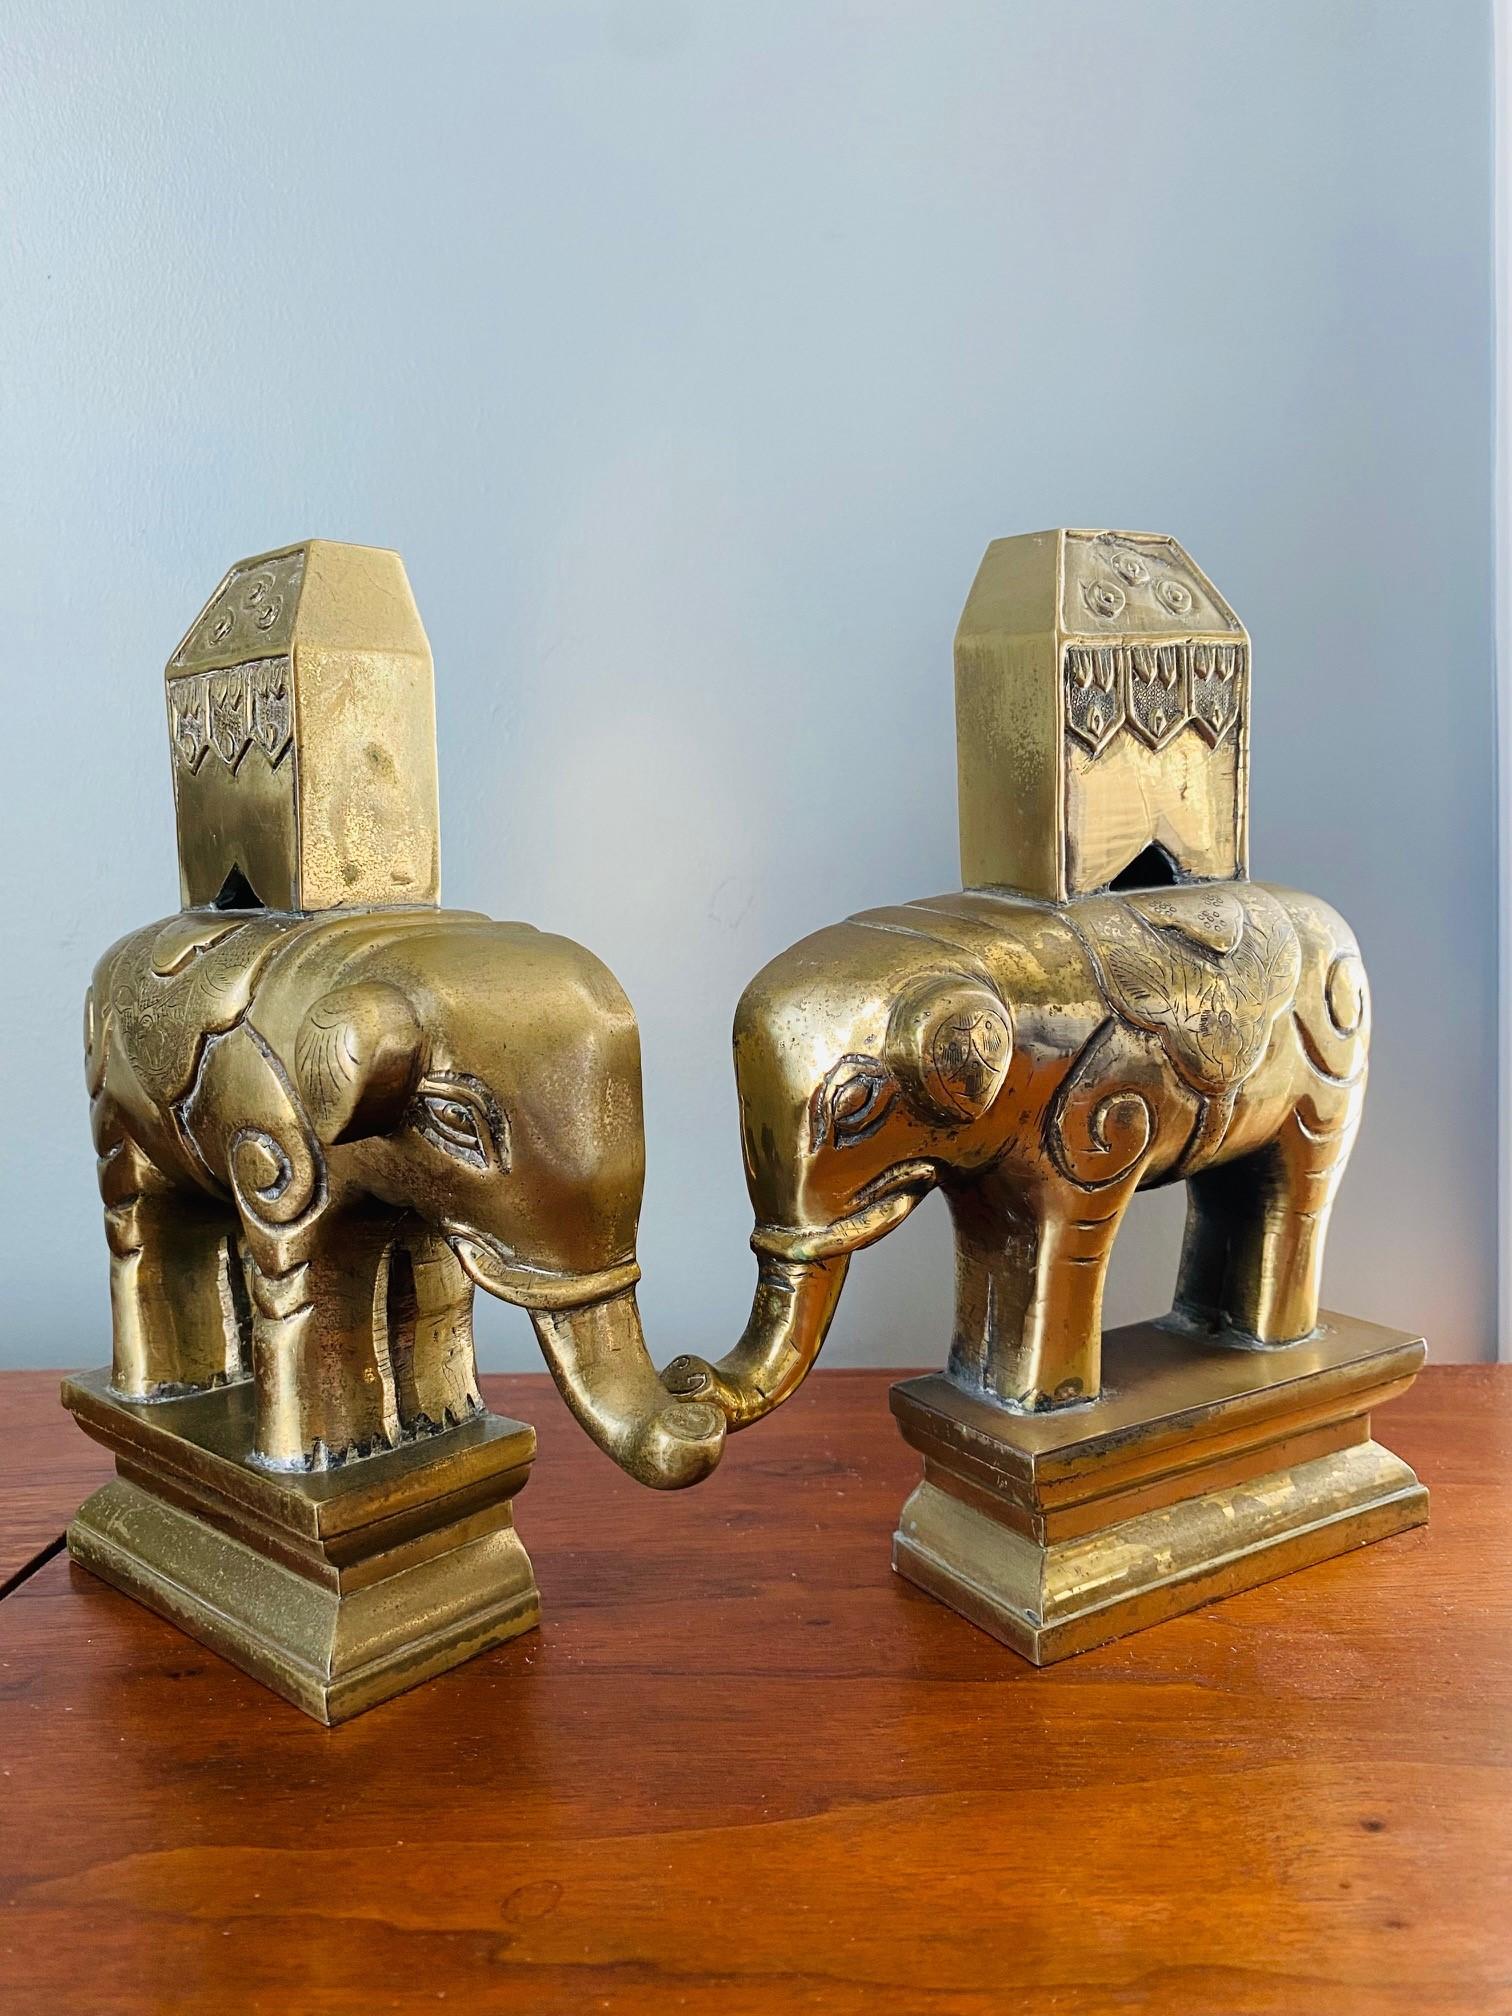 Vintage 1940s Pair of Sculptural Elephant Bookends in Solid Brass For Sale 7